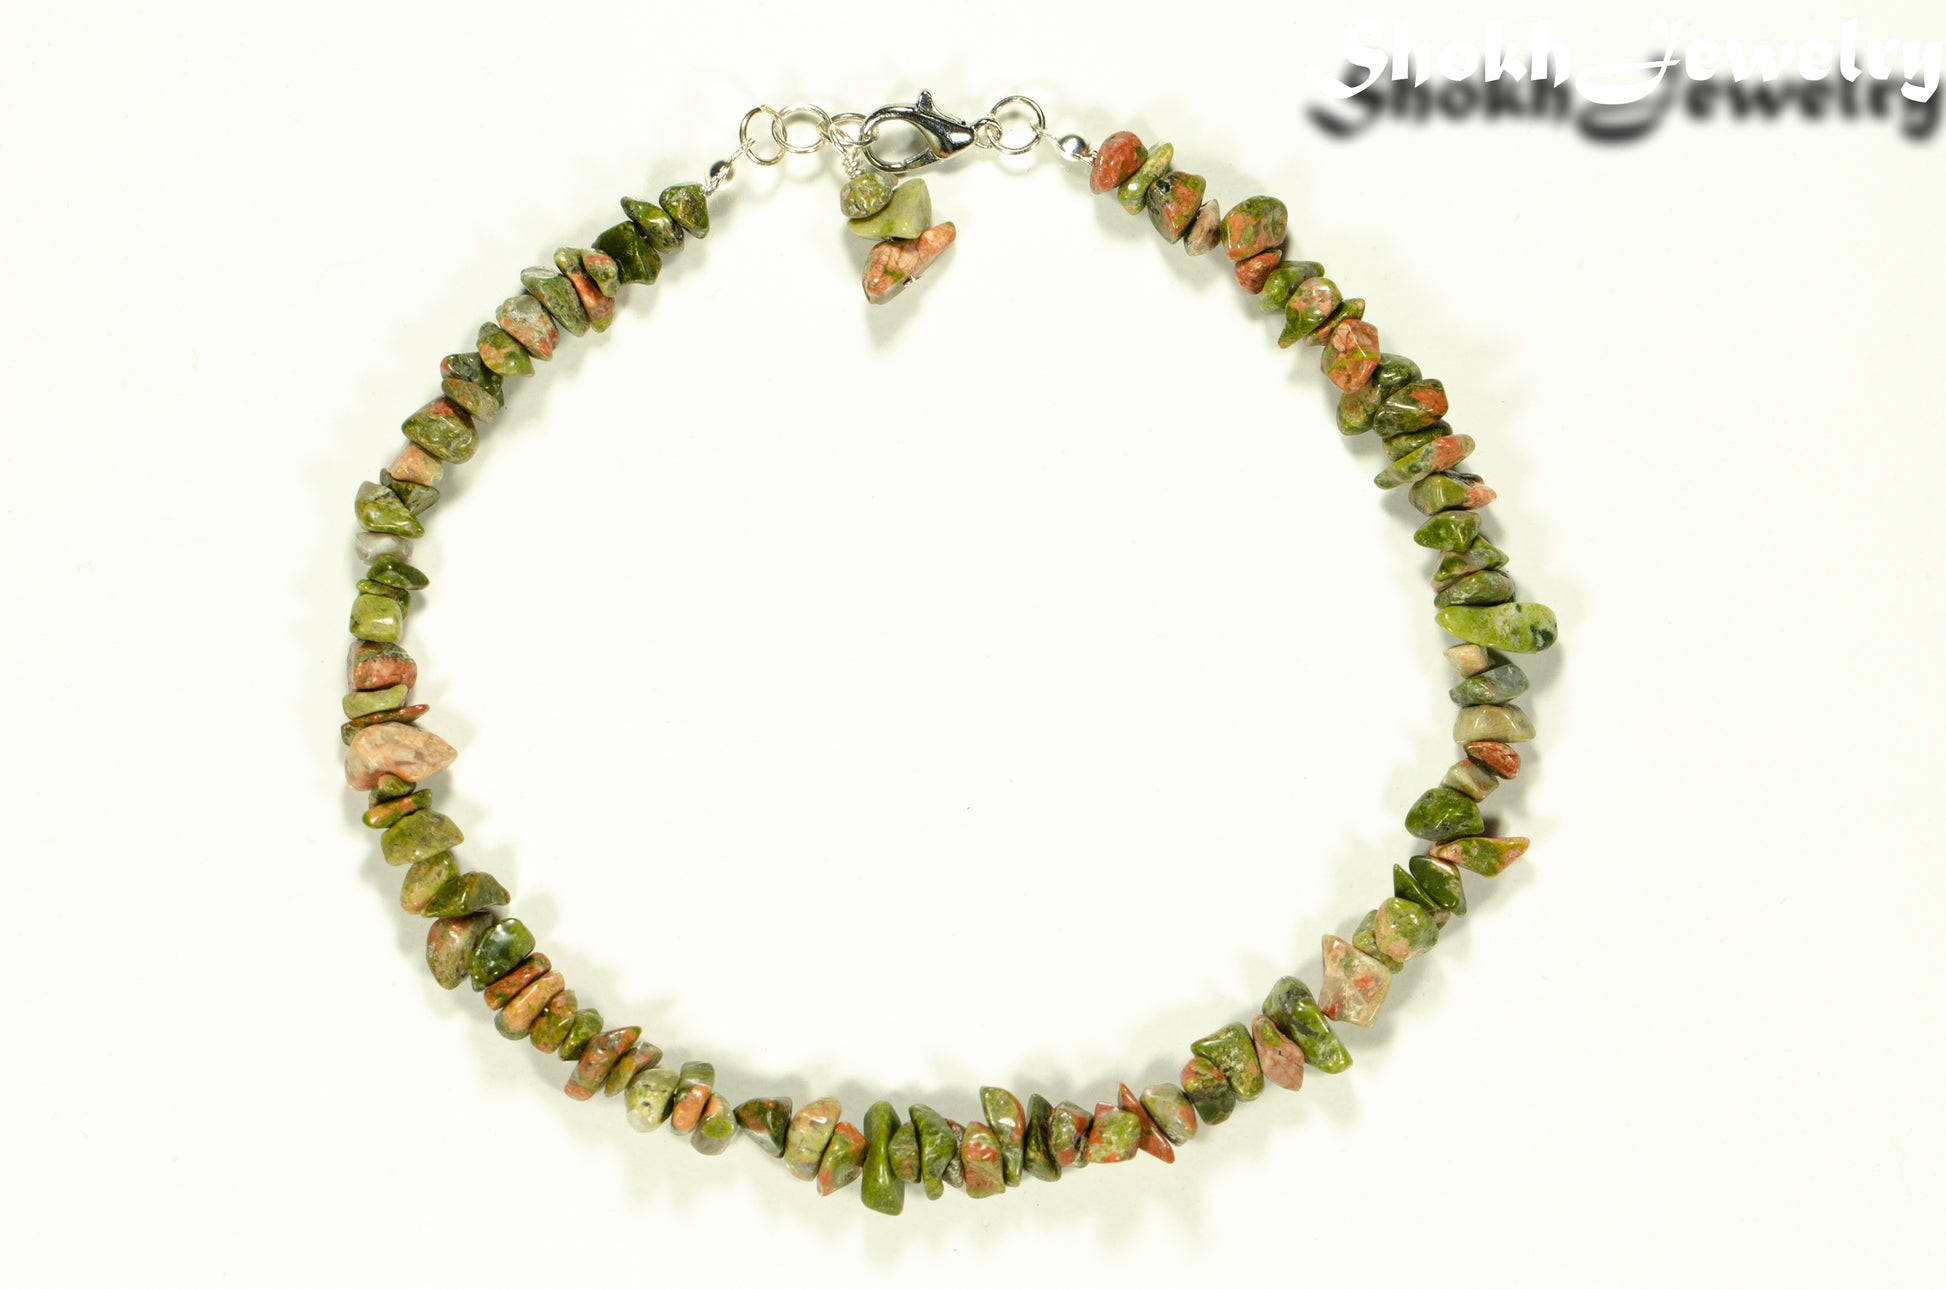 Top view of Natural Unakite Crystal Chip Choker Necklace